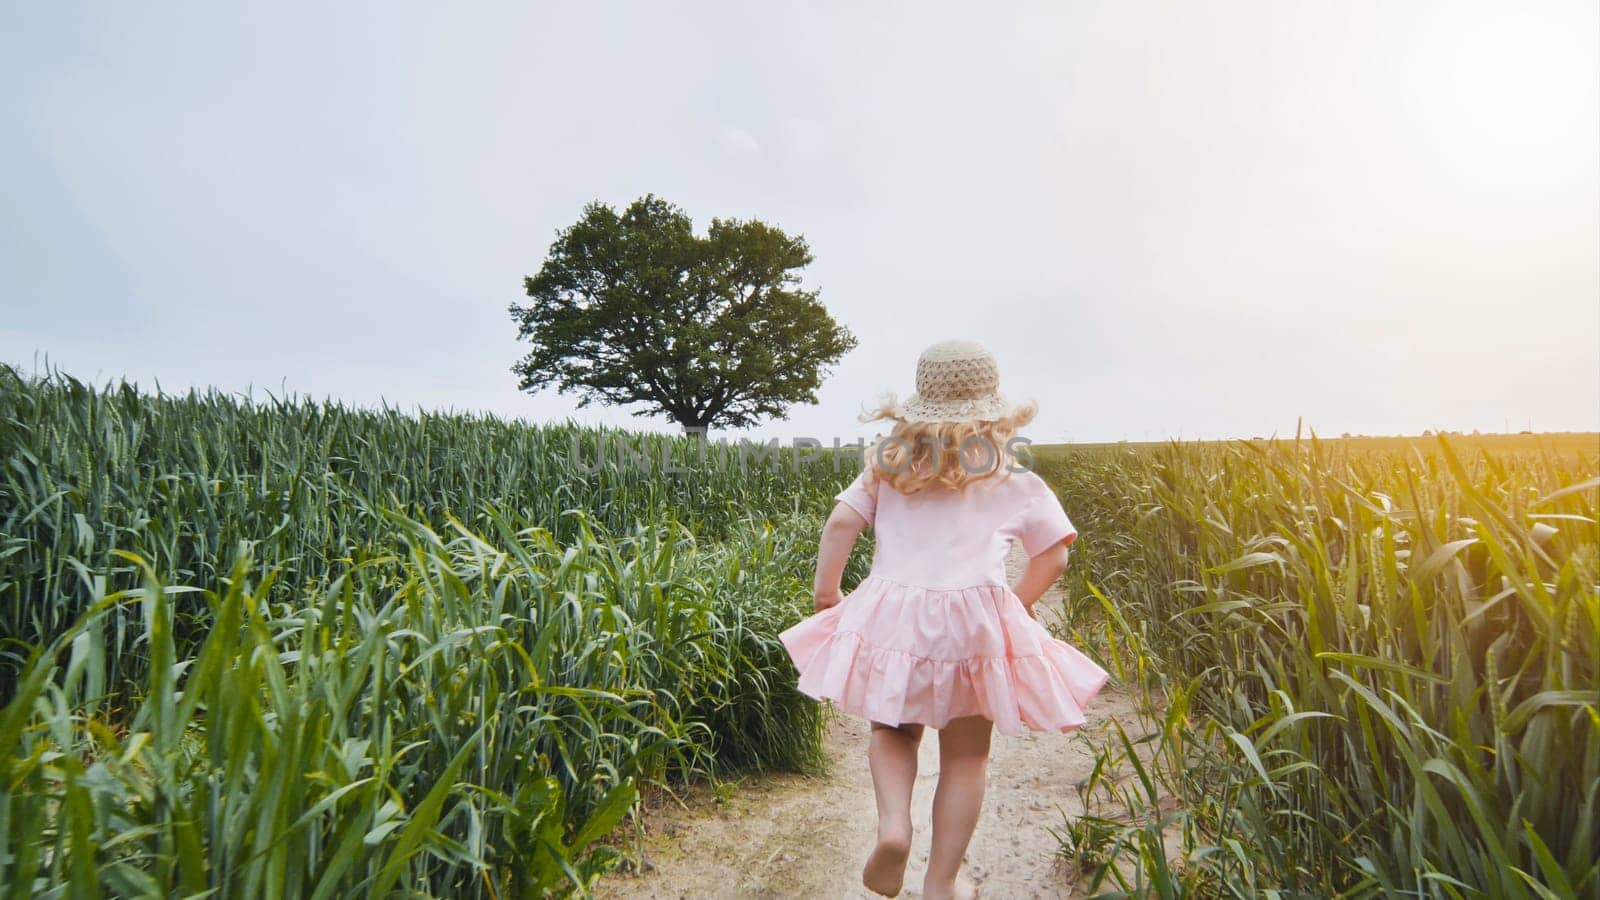 A little girl is running through a field of young wheat against the background of an oak tree. by DovidPro